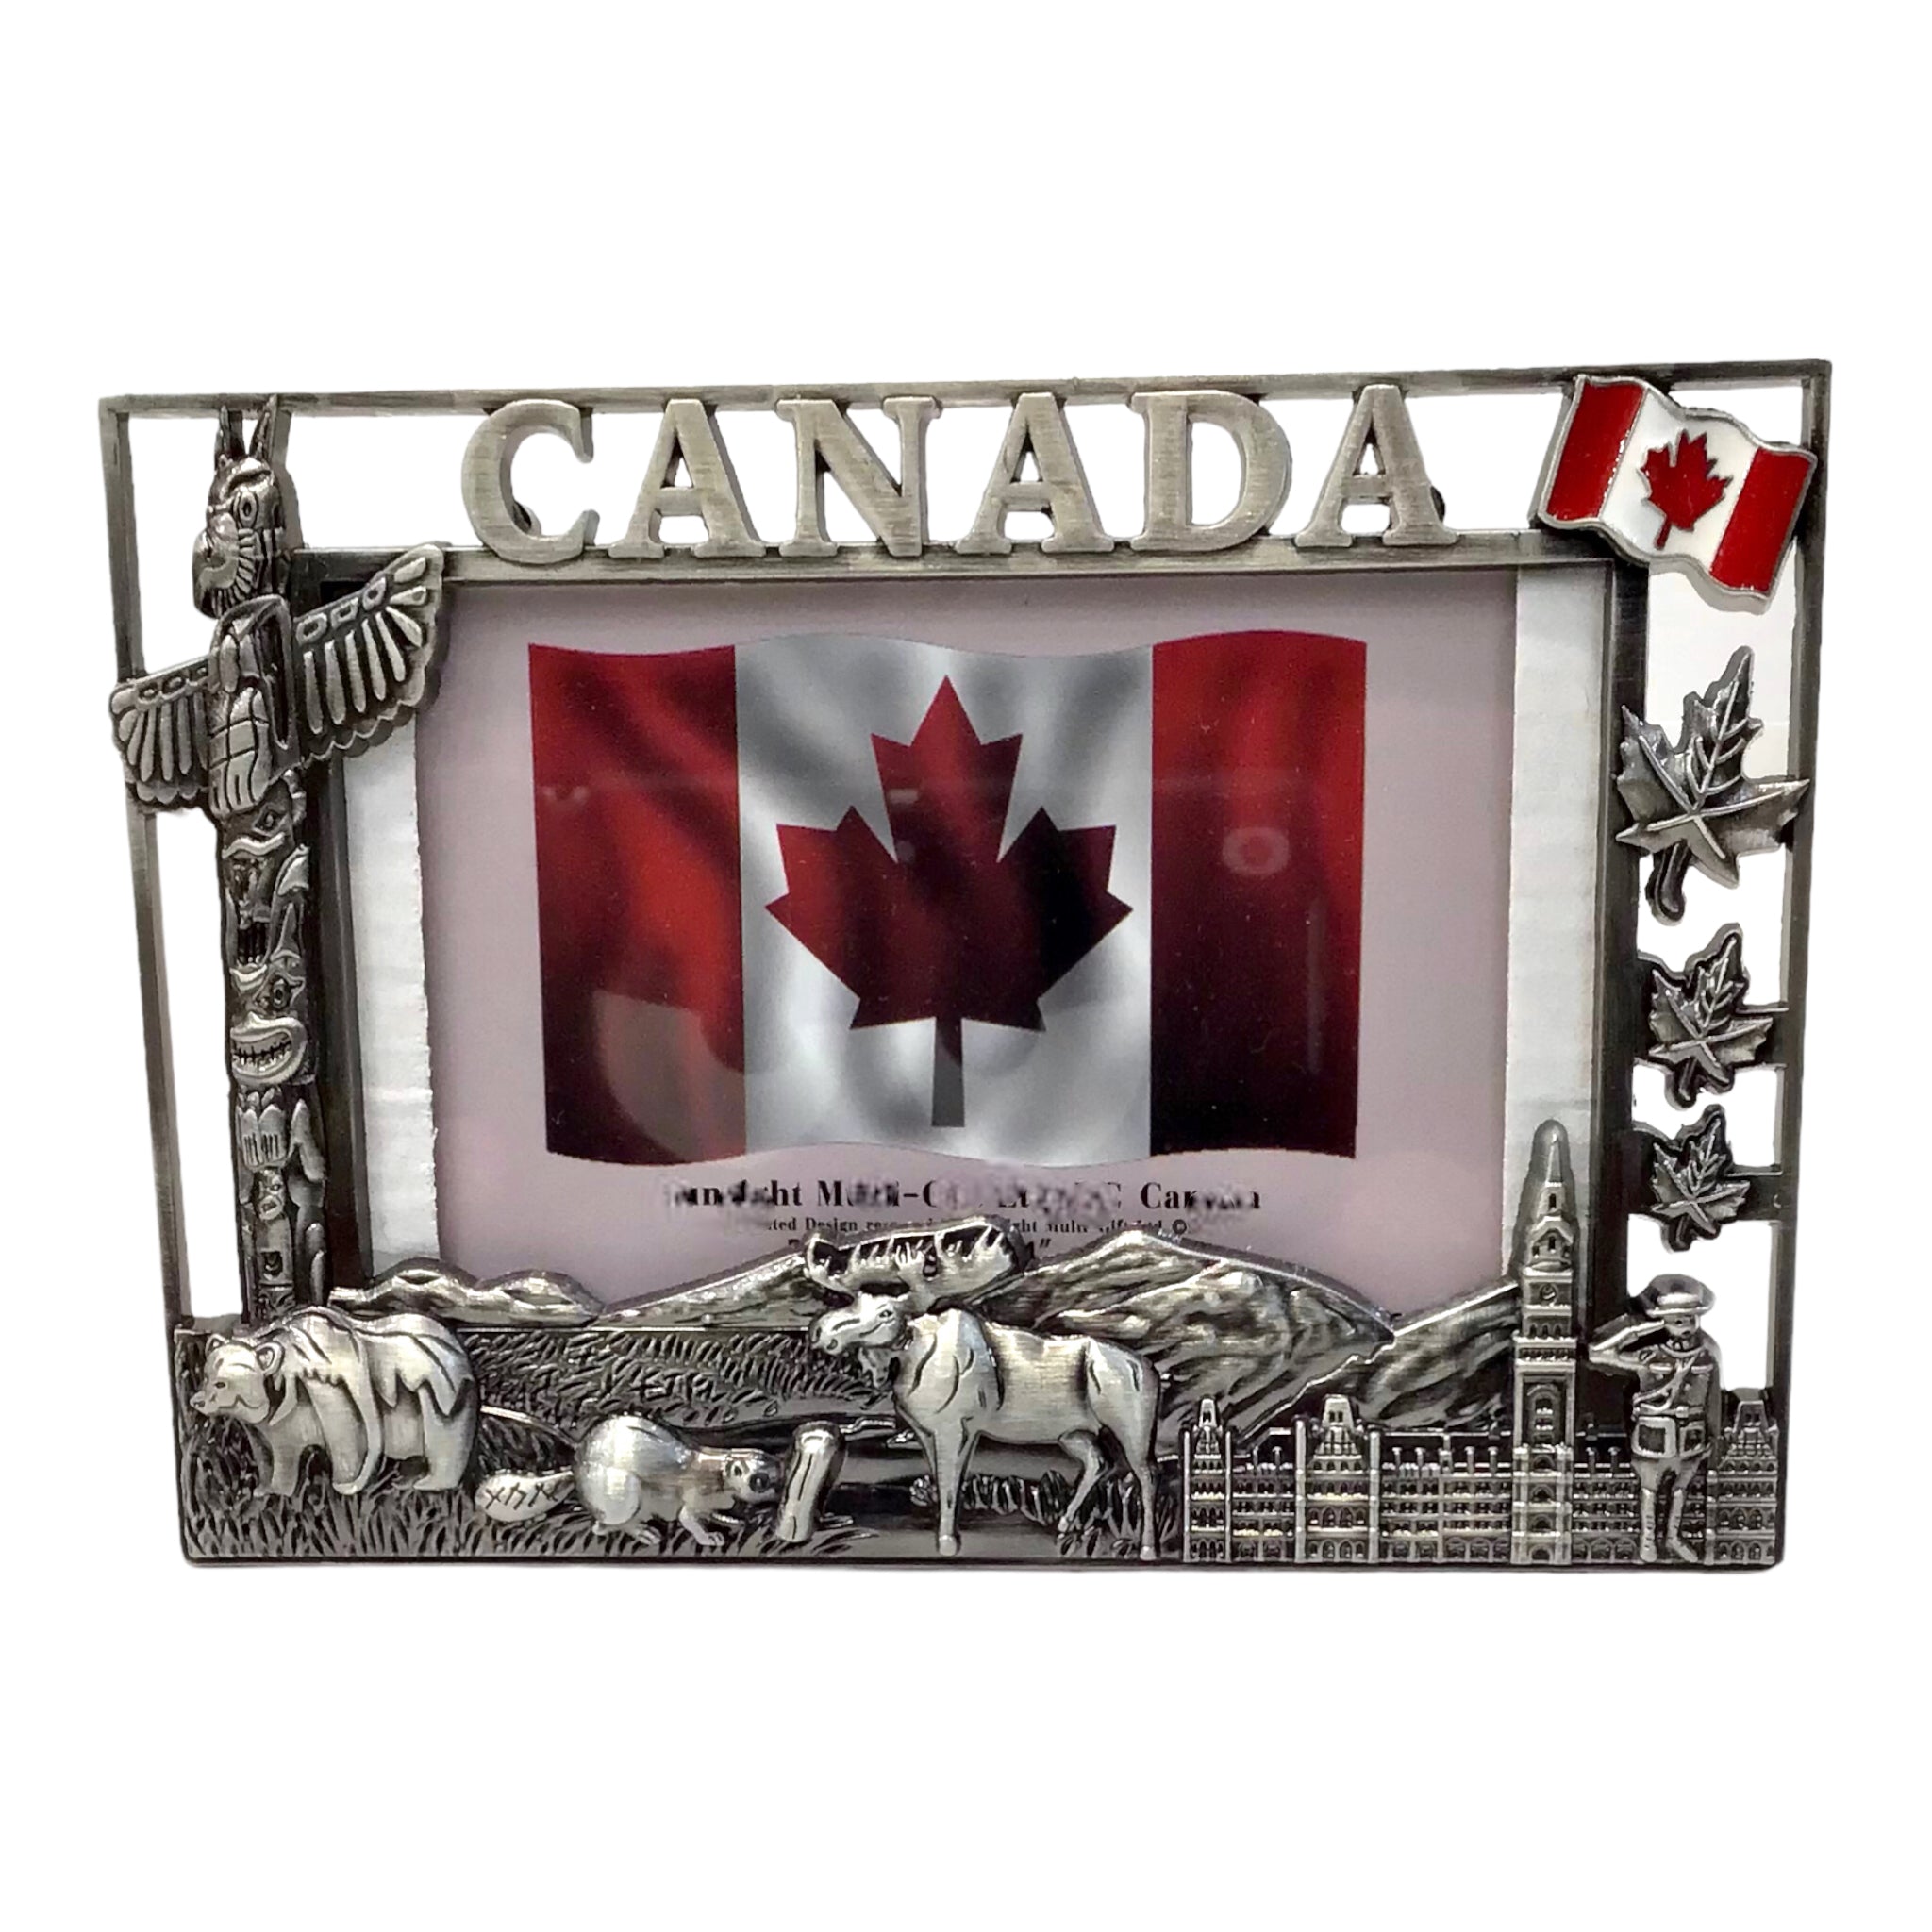 PICTURE FRAME CANADA SCENIC VINTAGE EMBOSSED 3D CUT 6.5” x 4.5” METAL PICTURES FRAME FOR 4x6 PHOTO